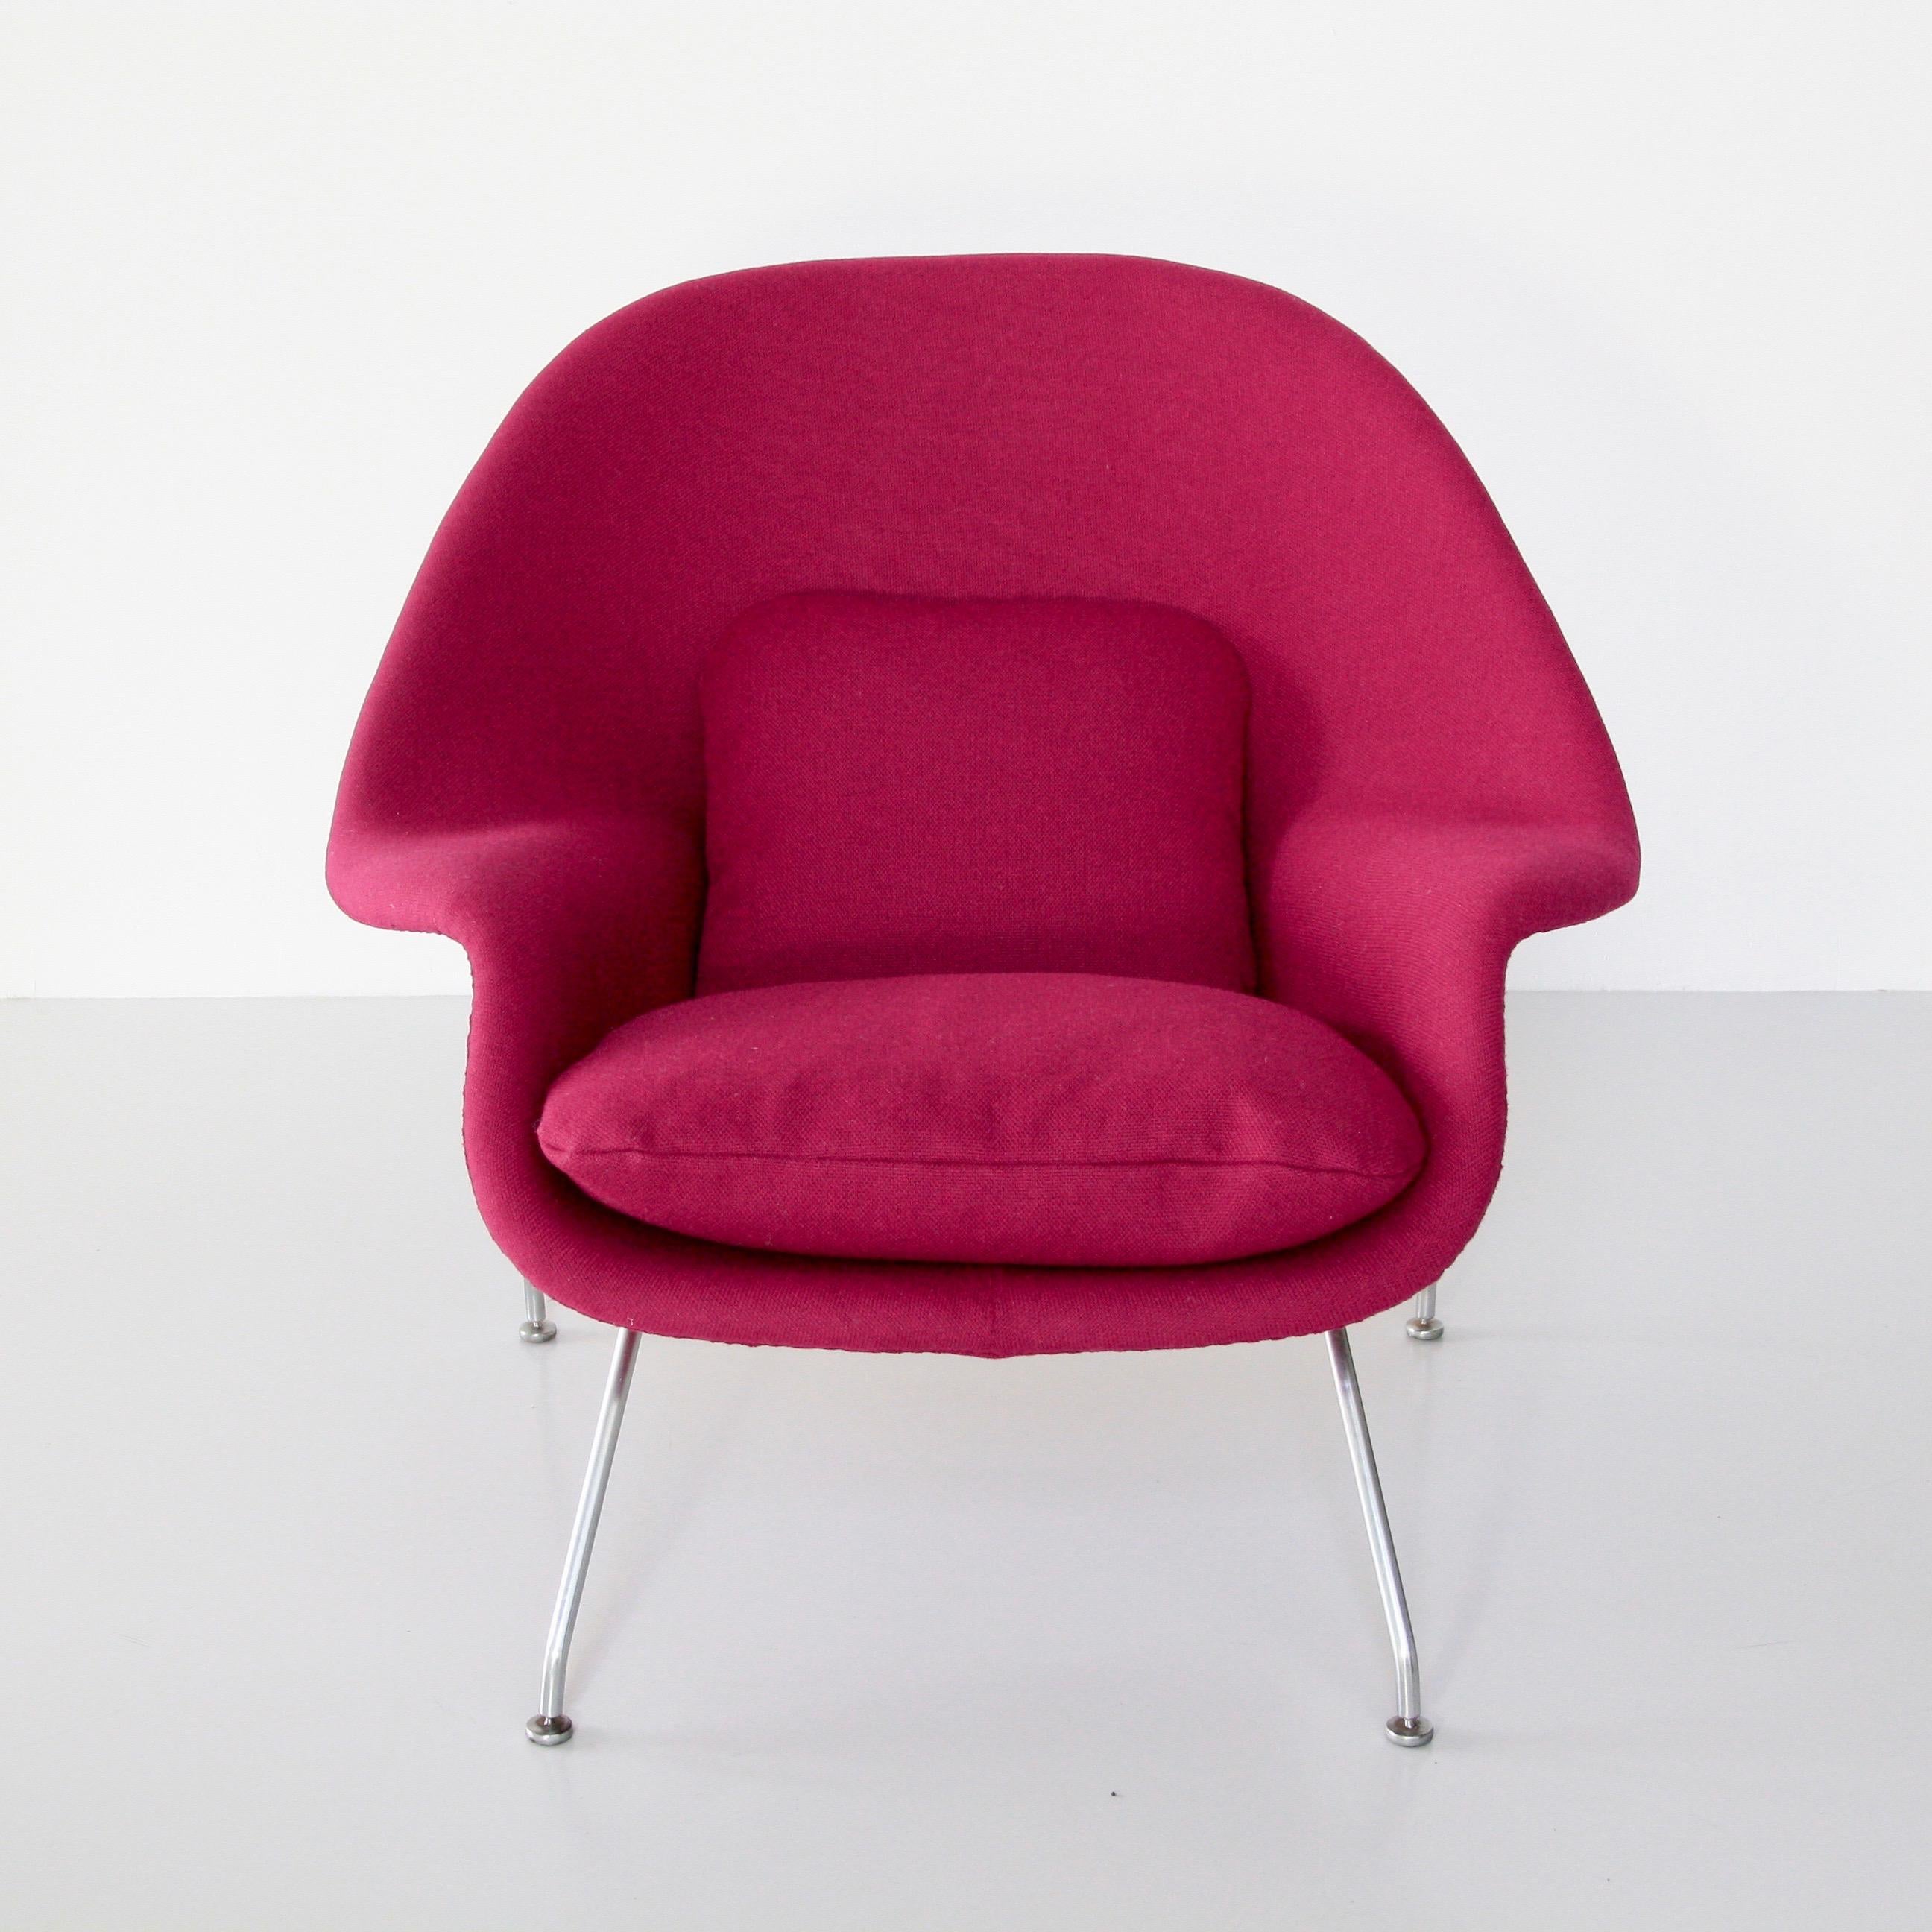 An early model womb chair, designed by Eero Saarinen and produced by Knoll International. The chair has been restored and newly upholstered. Super comfortable!